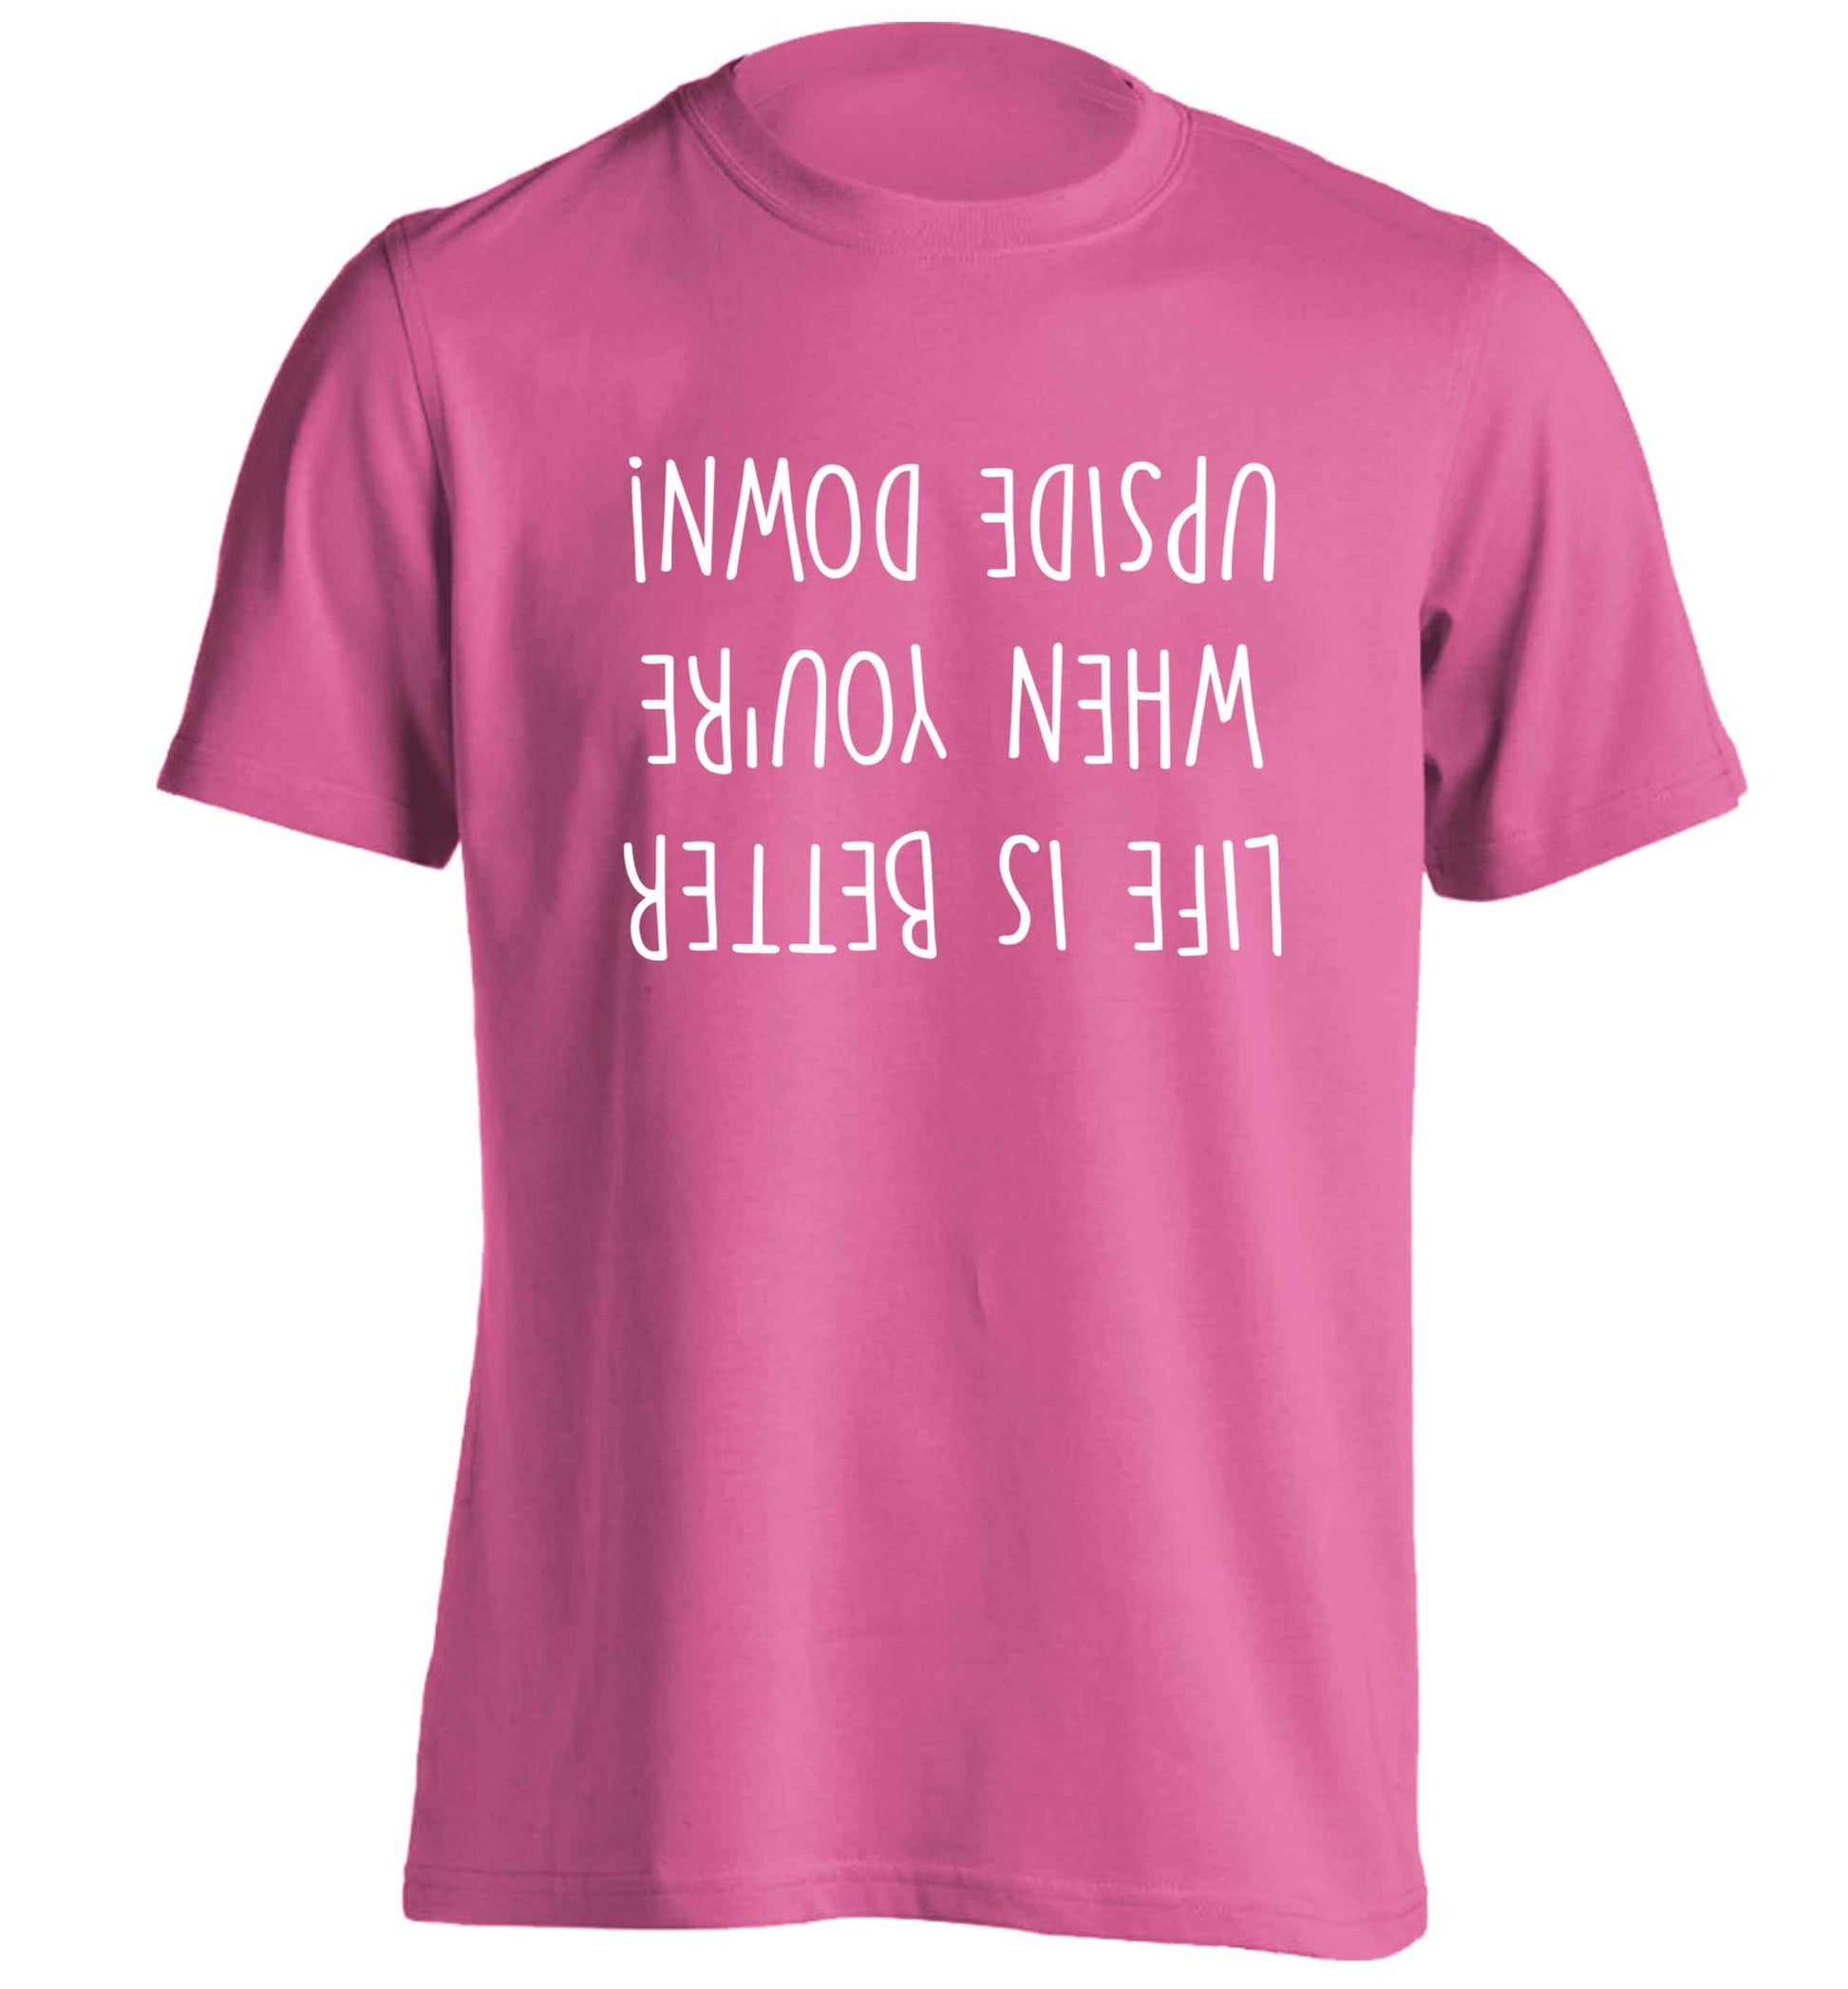 Life is better upside down adults unisex pink Tshirt 2XL